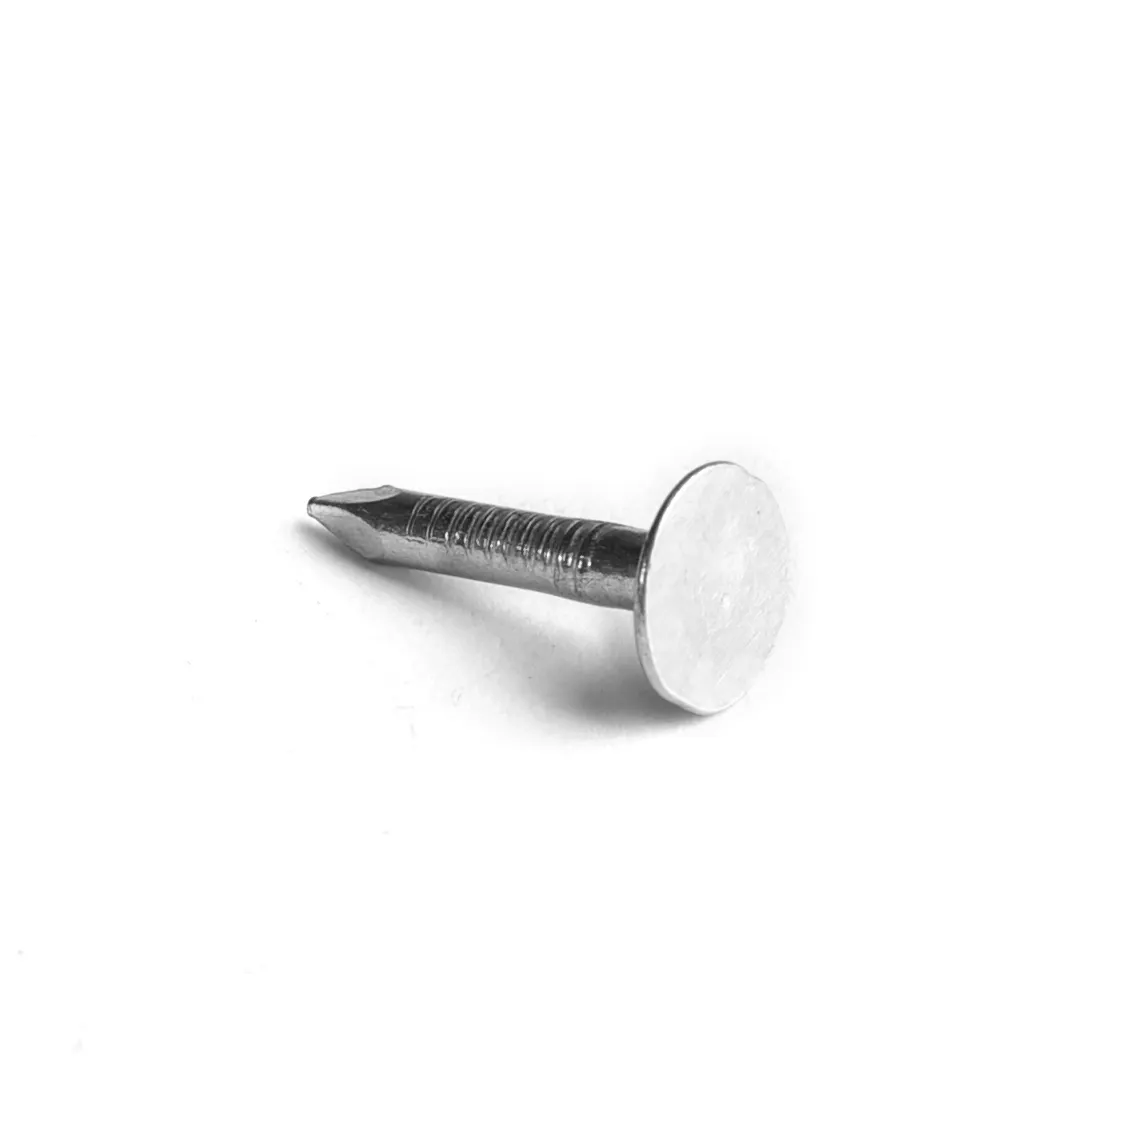 plastic washers for roofing nails roofing nail smooth shank galvanized roofing nail with umbrella head